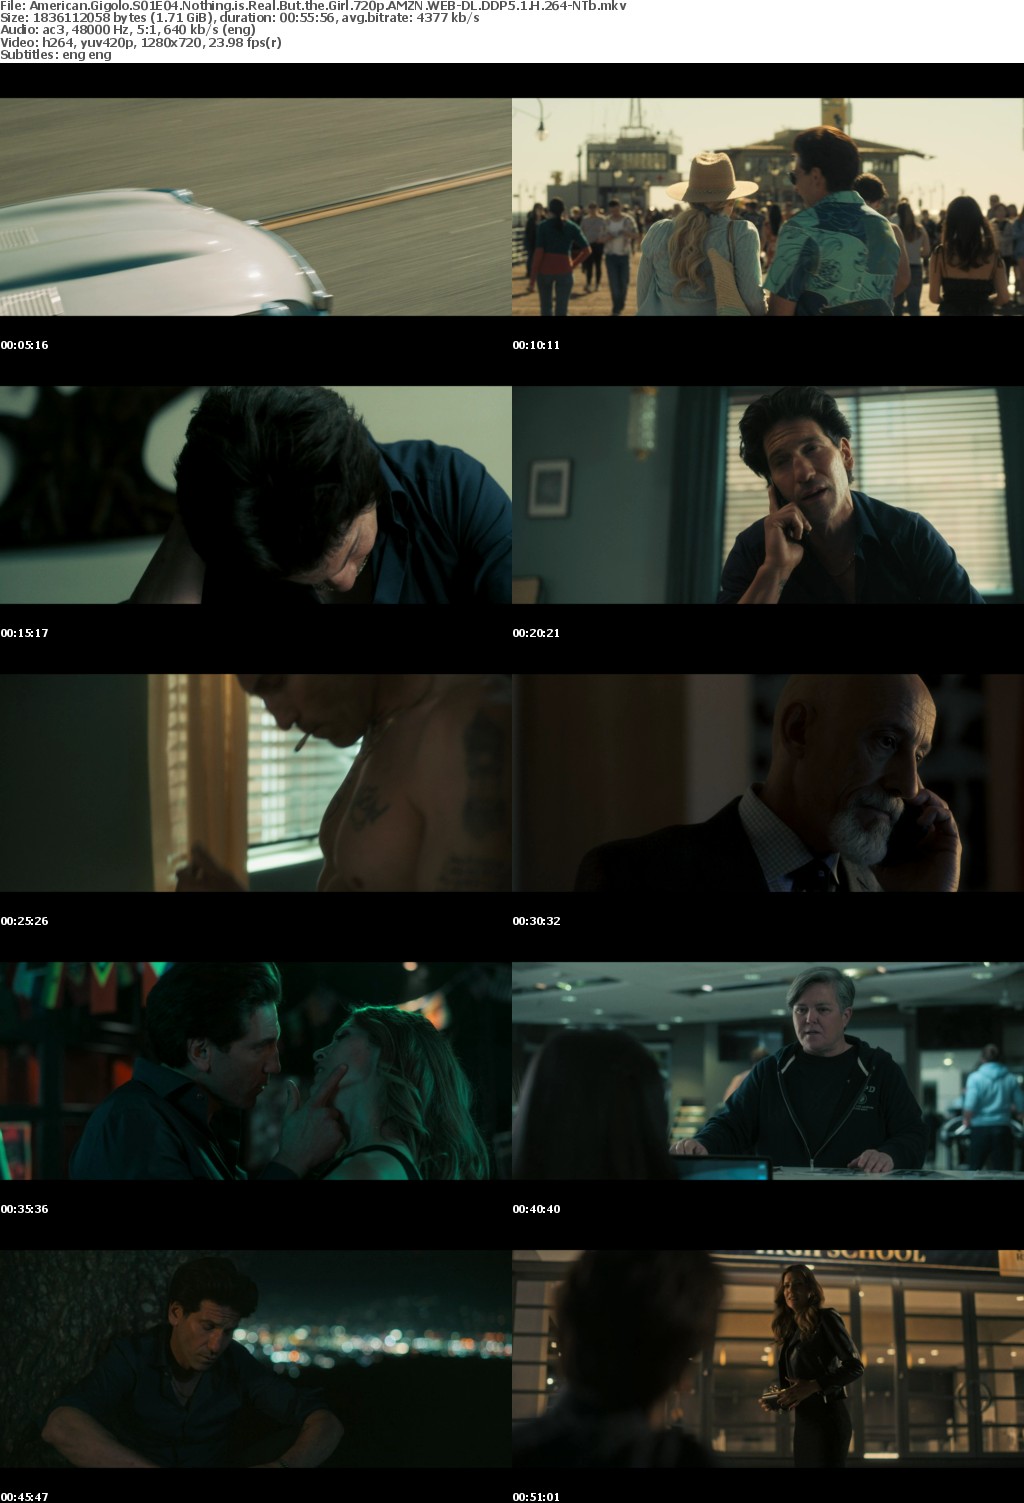 American Gigolo S01E04 Nothing is Real But the Girl 720p AMZN WEBRip DDP5 1 x264-NTb